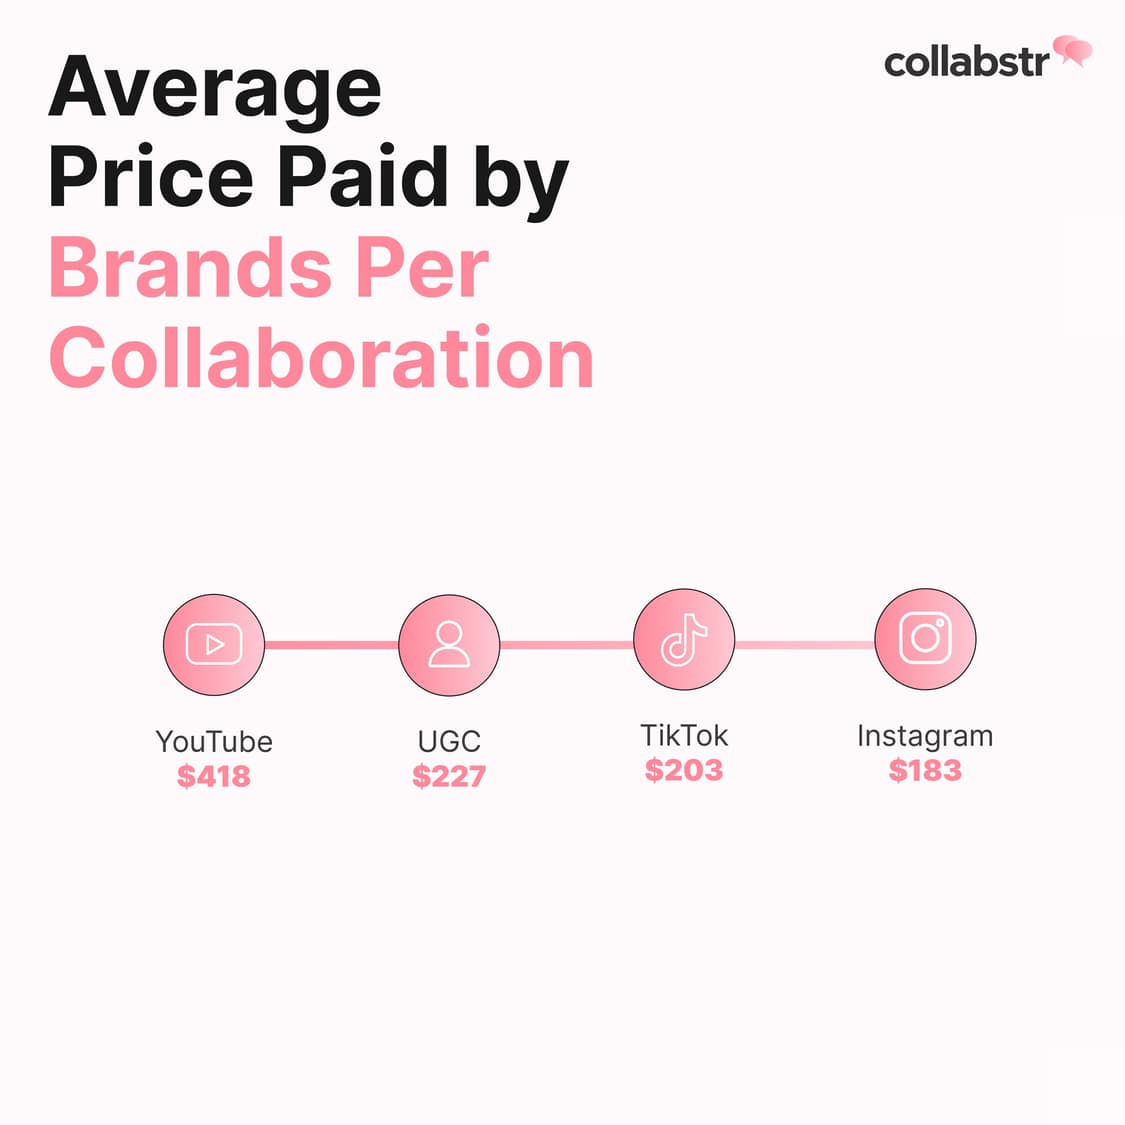 Average price that brands pay influencers on Instagram, TikTok, YouTube, and UGC.